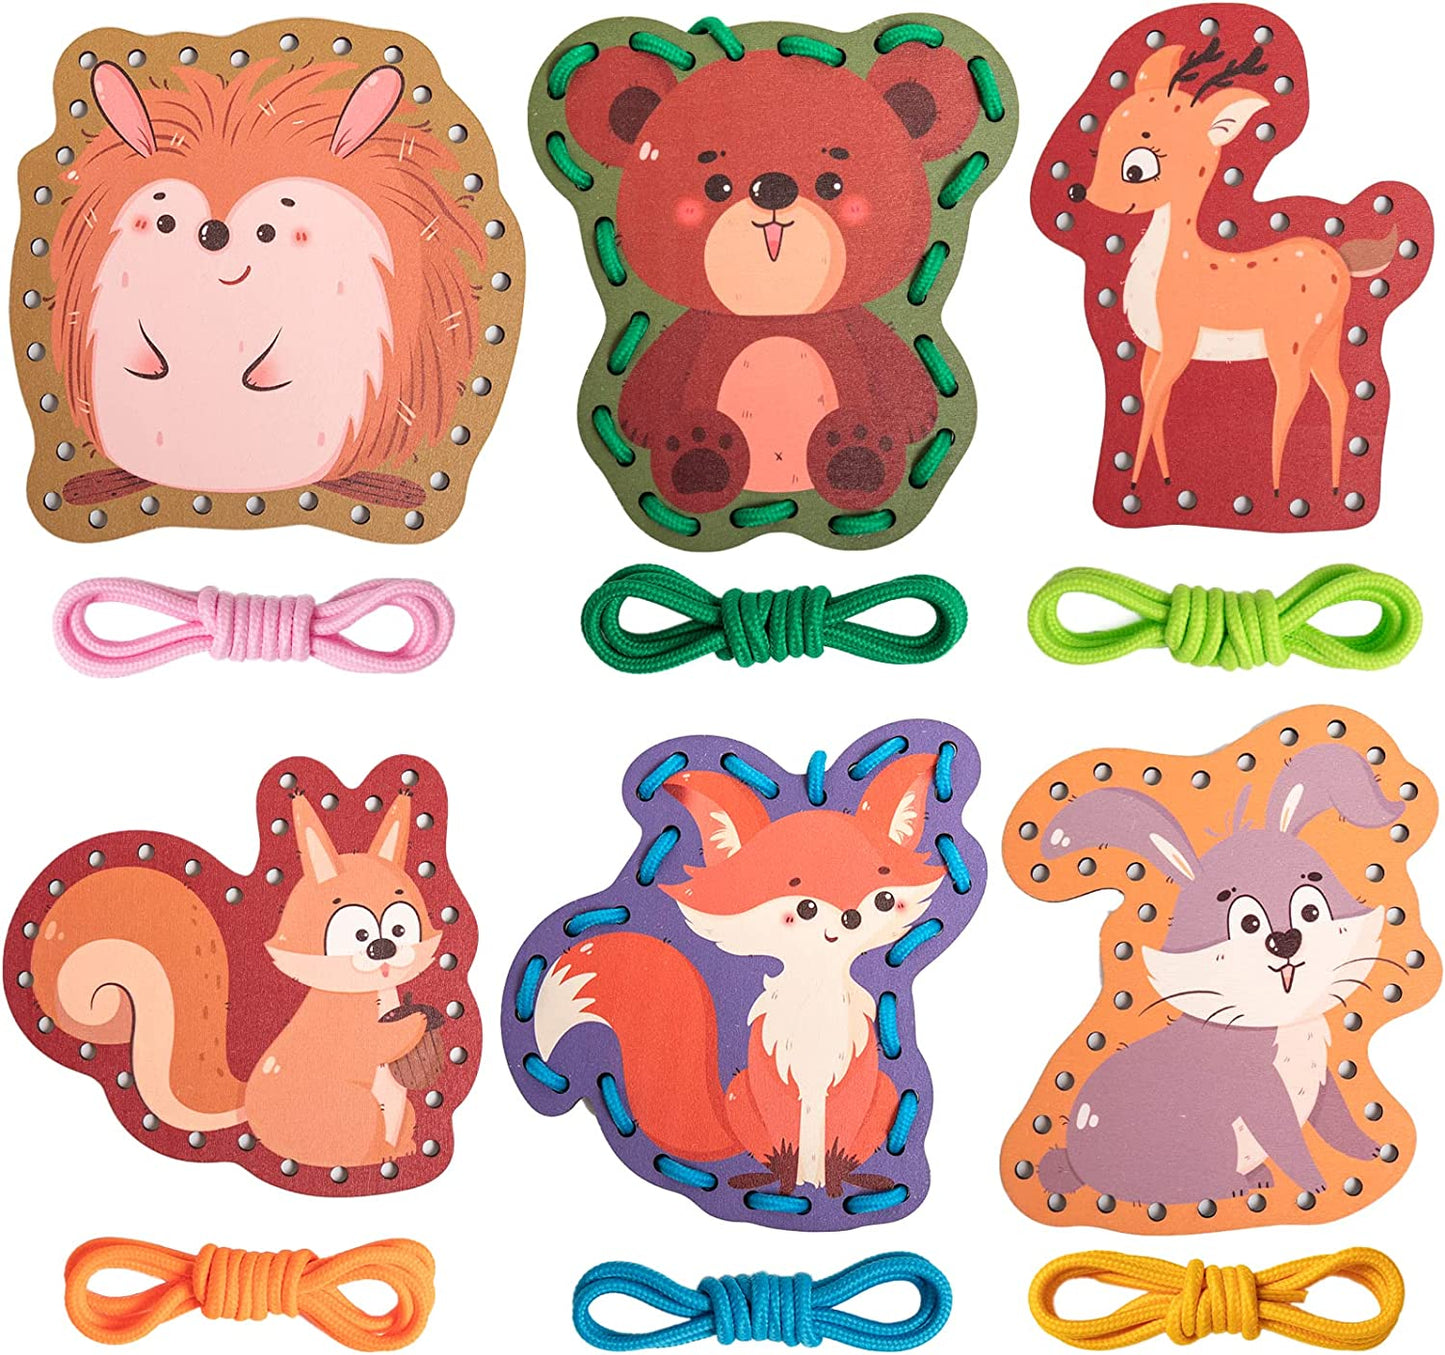 Montessori Wooden Forest Animals Lacing Cards (6 Pack)